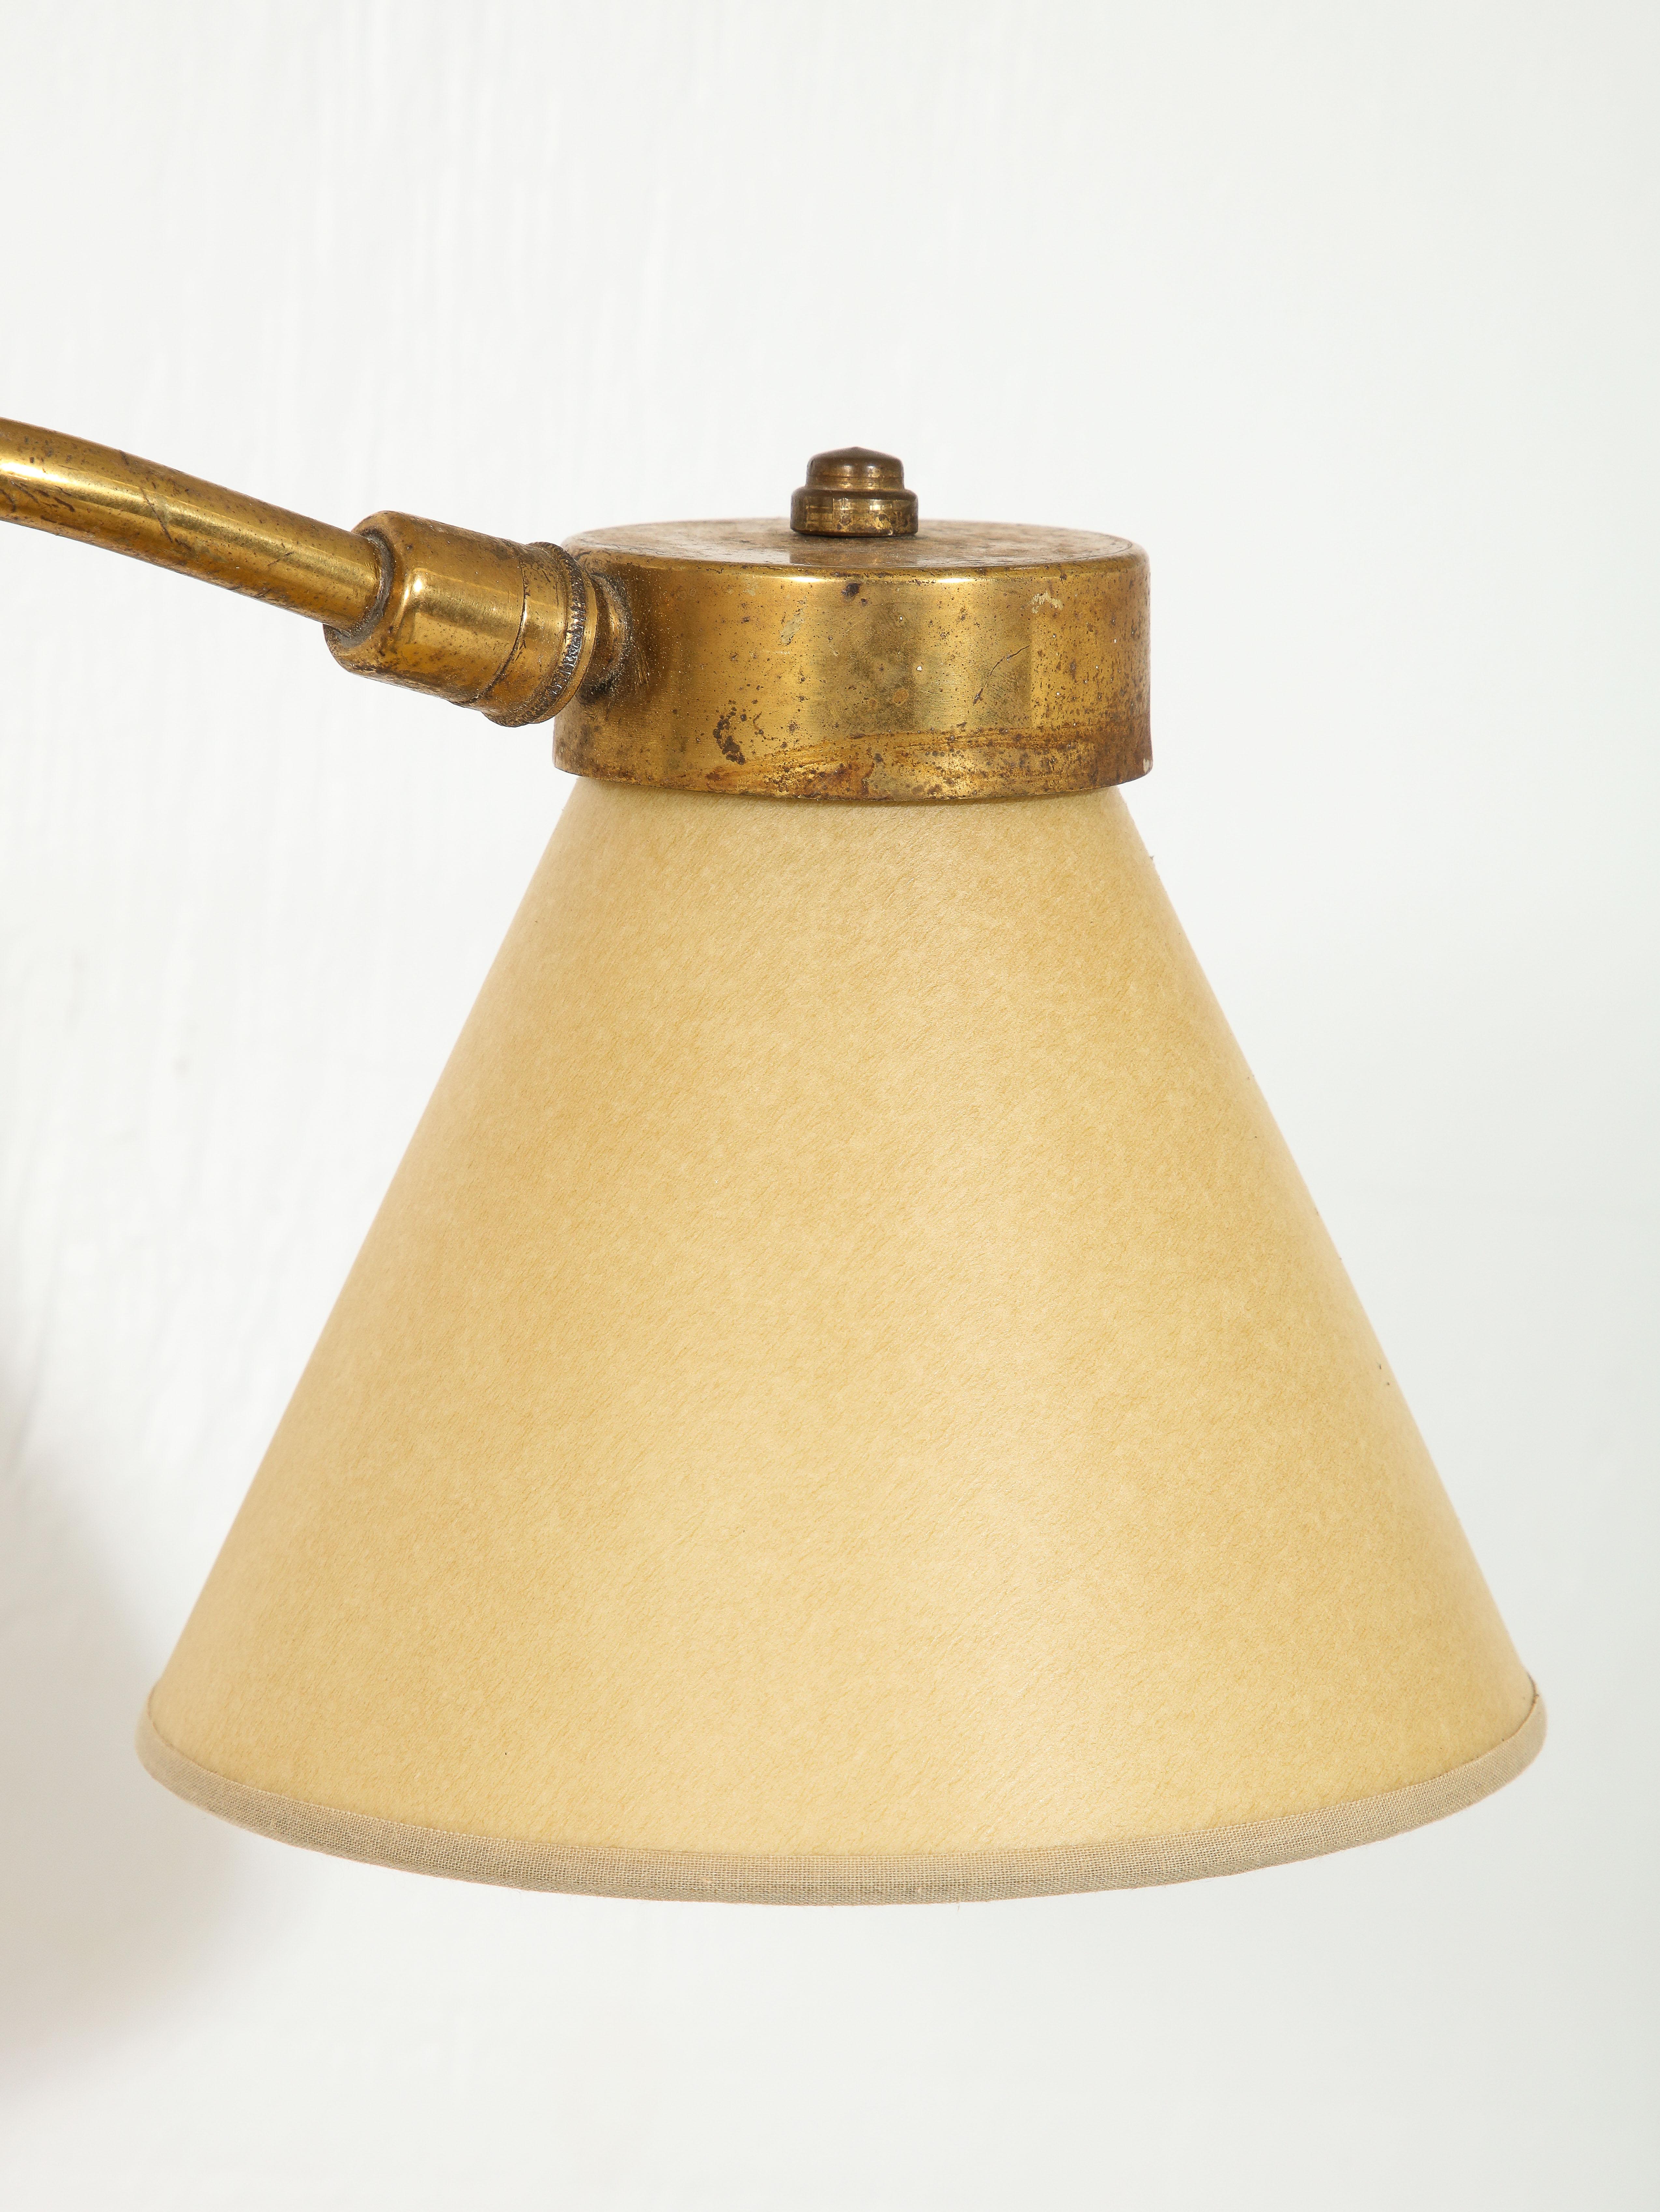 Single Down Light Brass Articulated Sconce, France 1960's For Sale 5